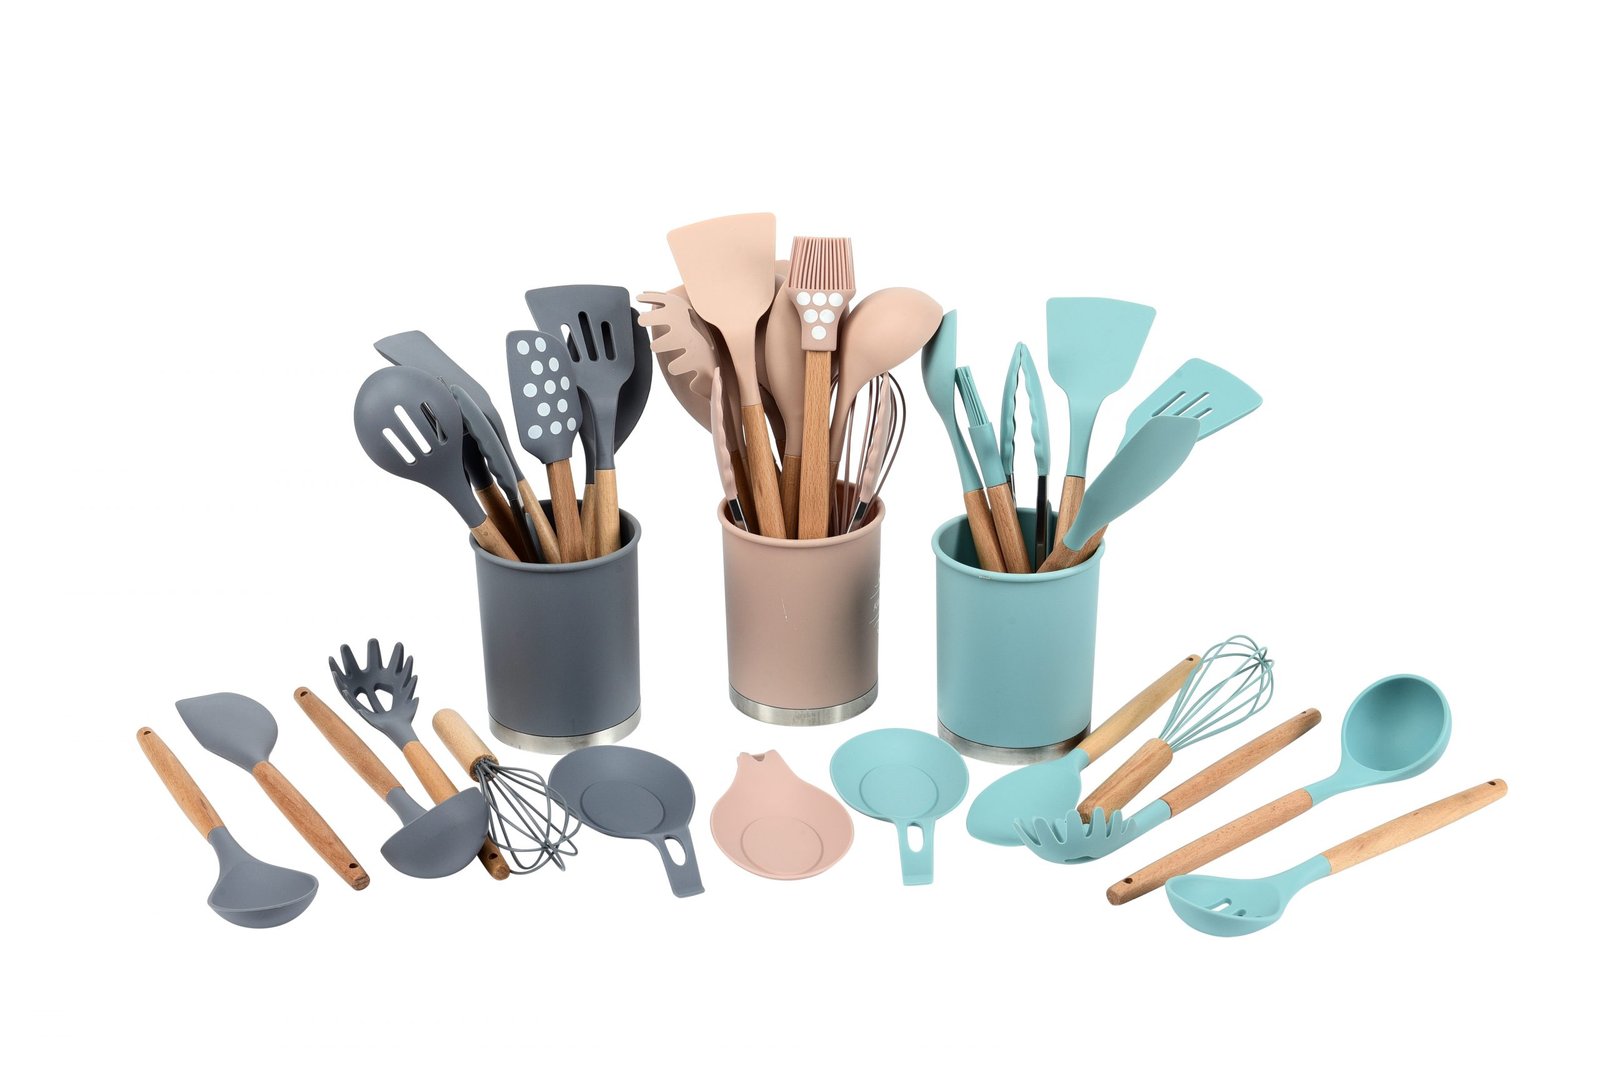 All Silicone Spatula - Buy 10 various utensils, get 1 free silicone oven  mitt!